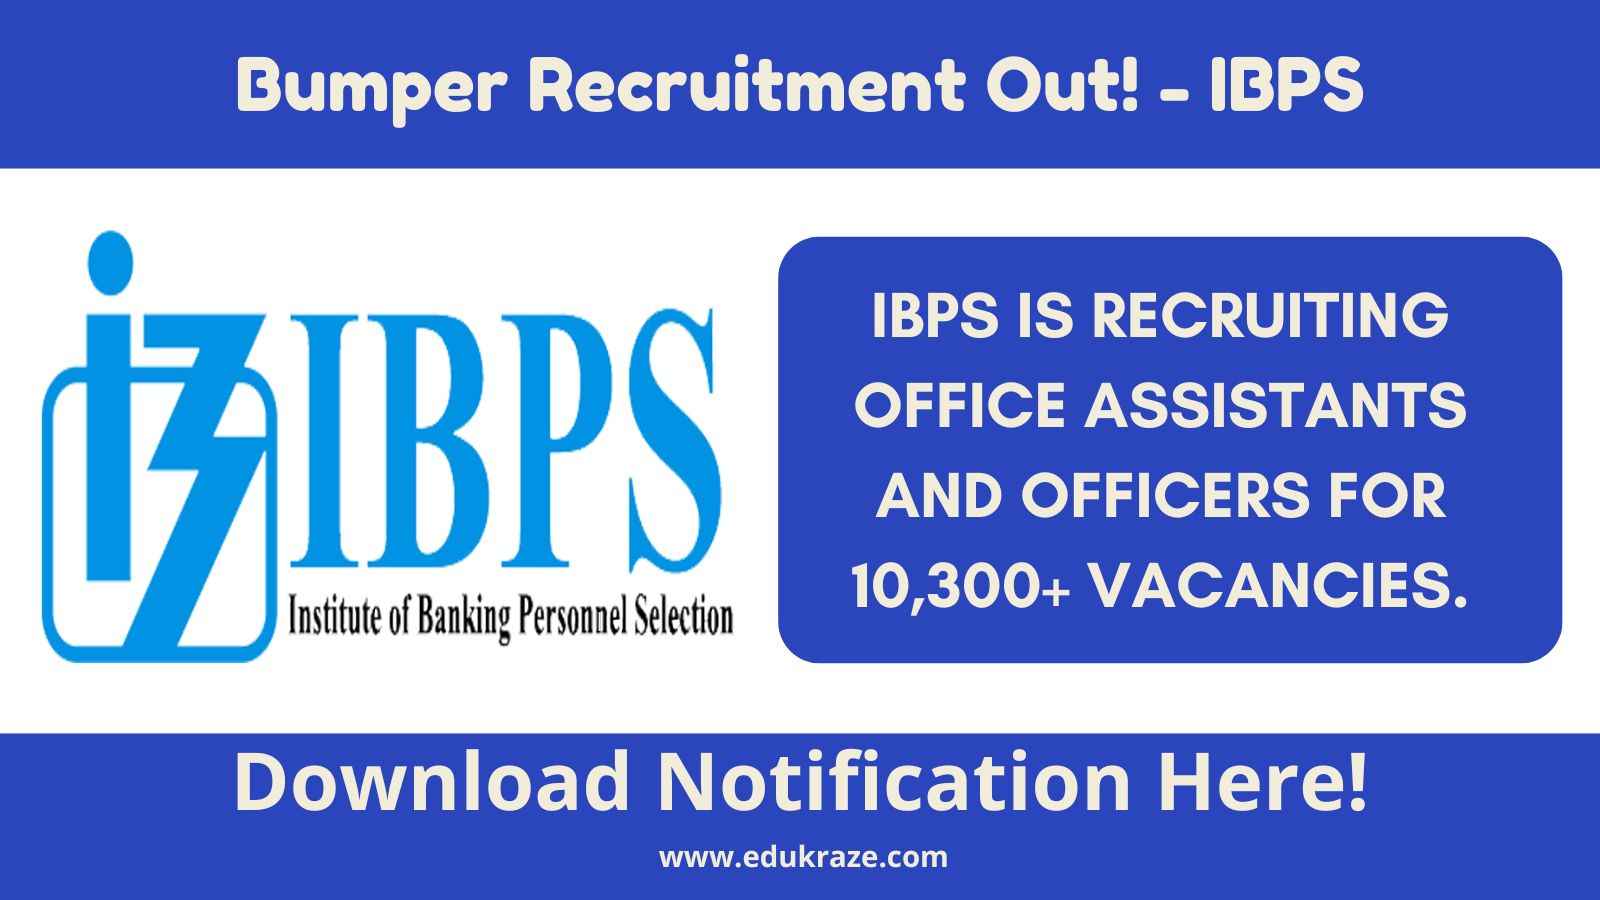 IBPS Bumper Recruitment For Office Assistants and Officers for 10,300+ Vacancies.